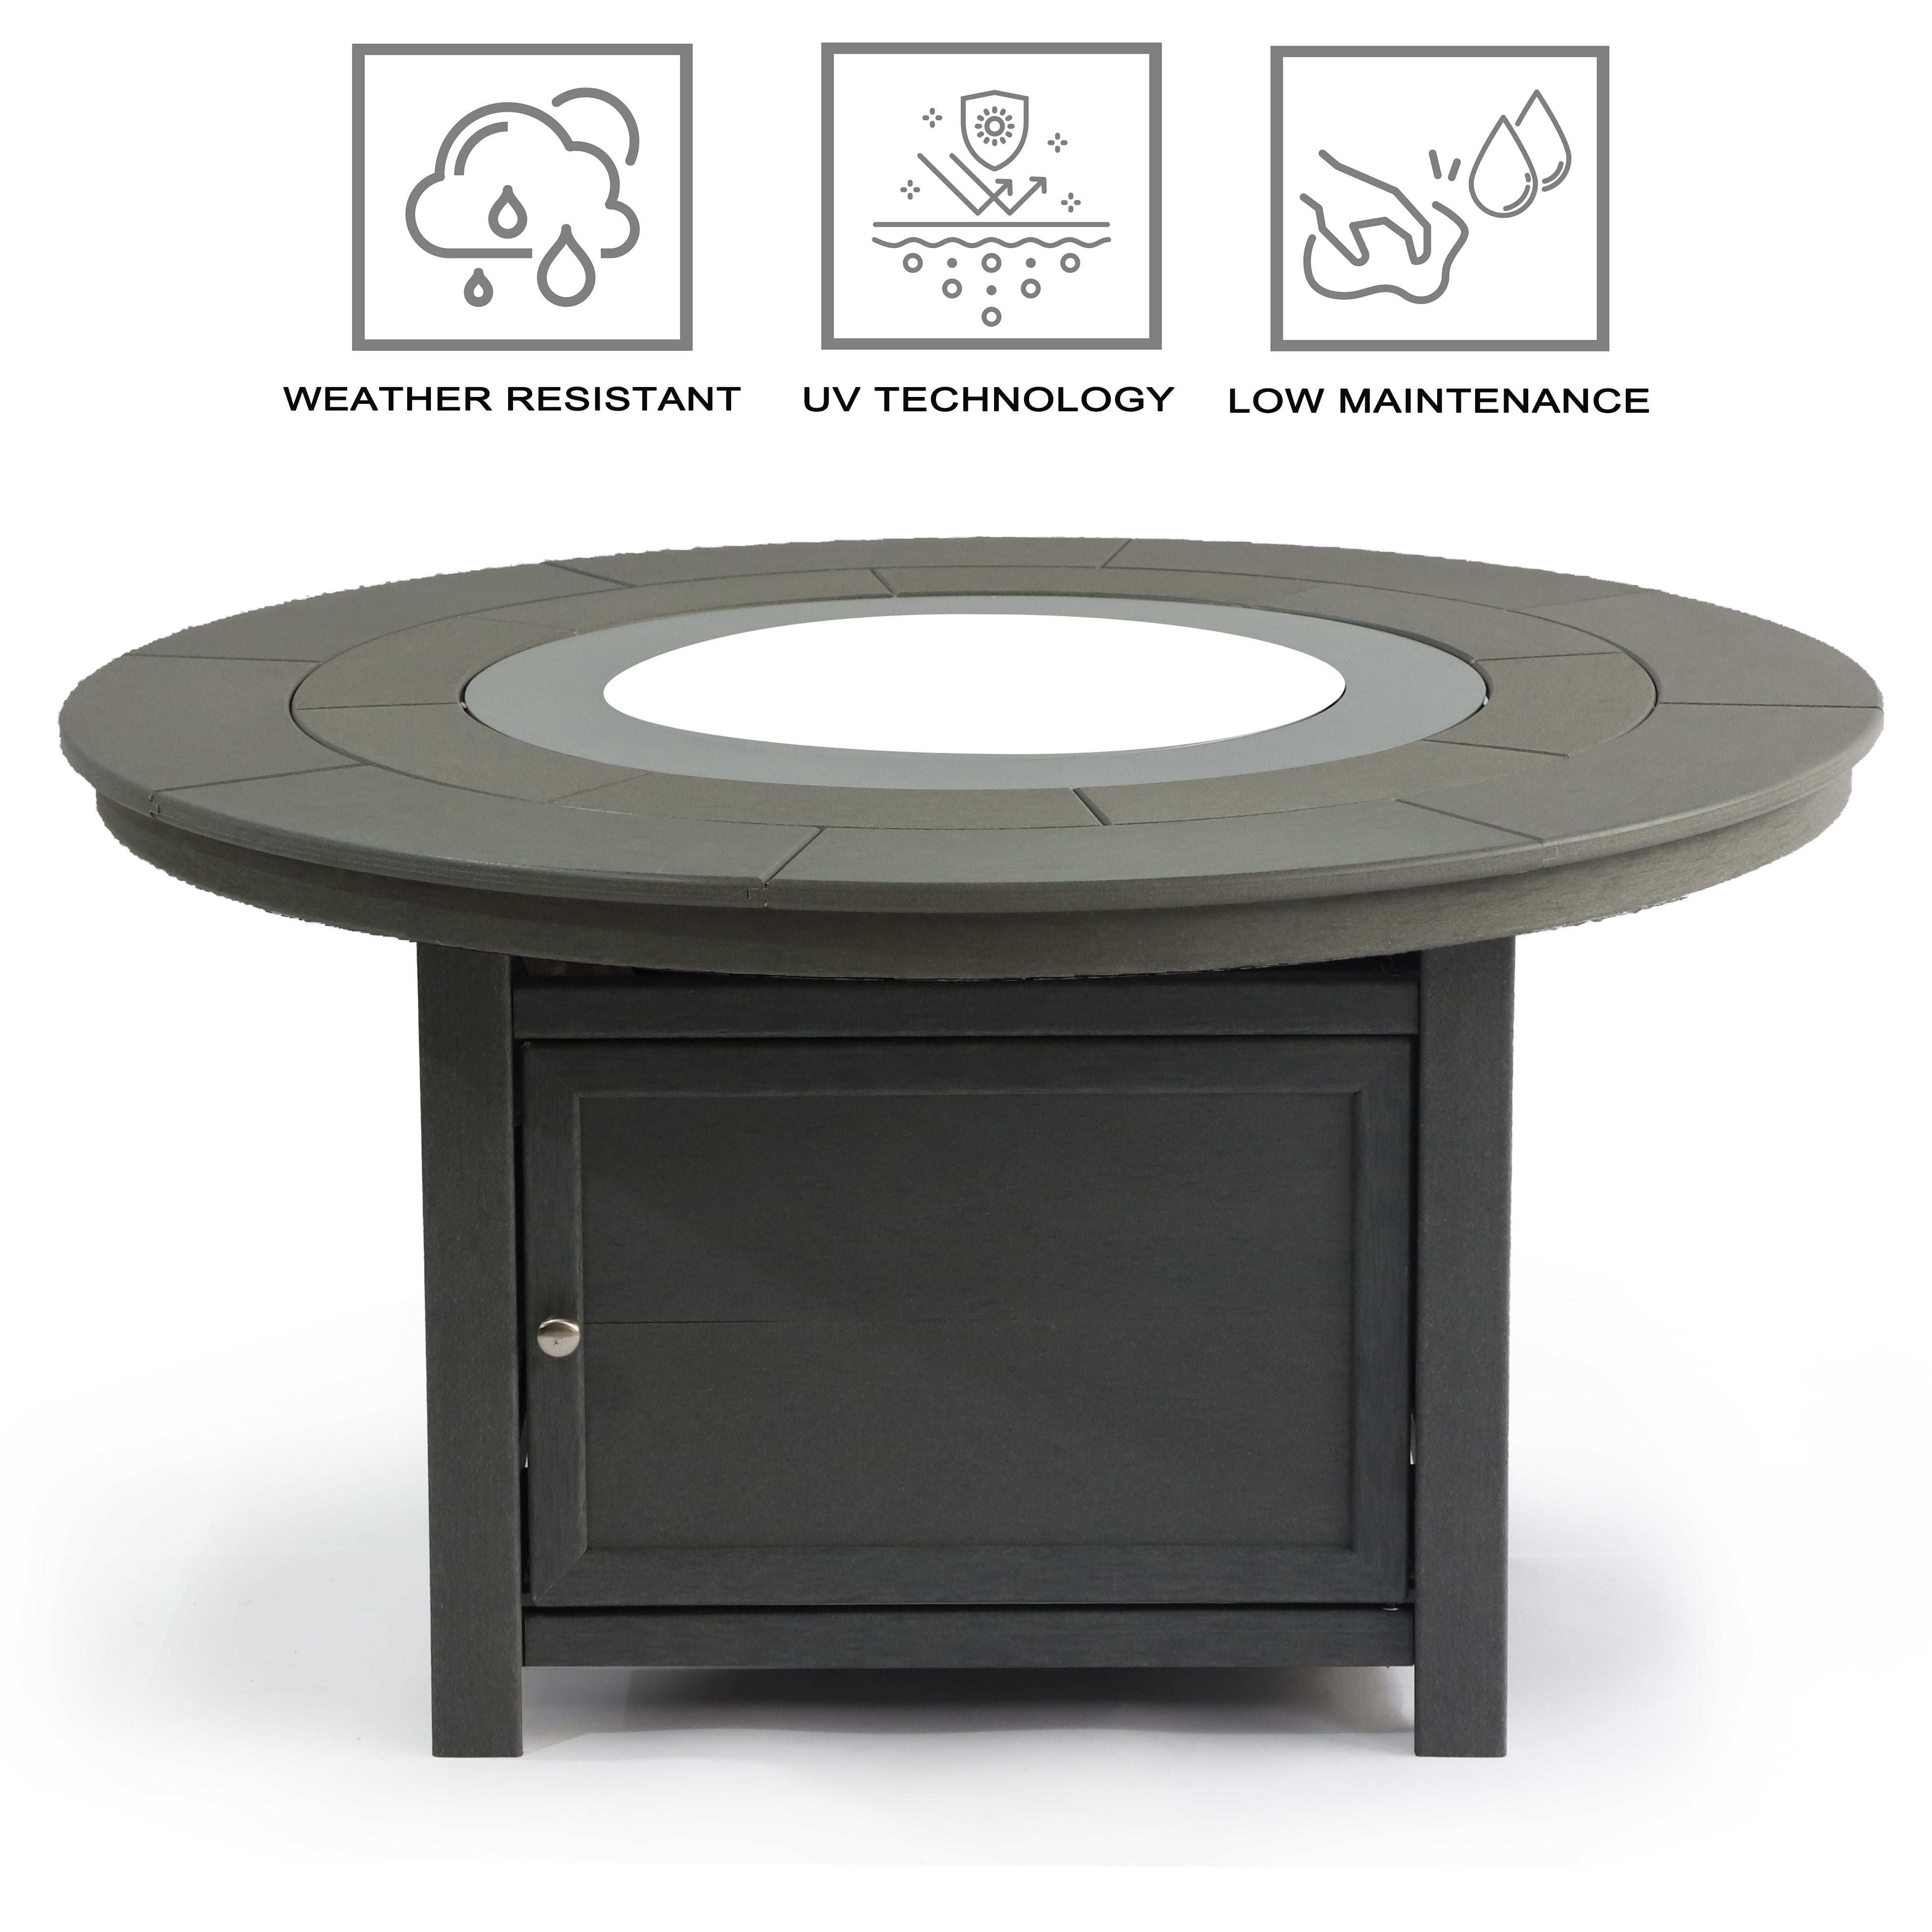 Round HDPE Patio Firepit Table